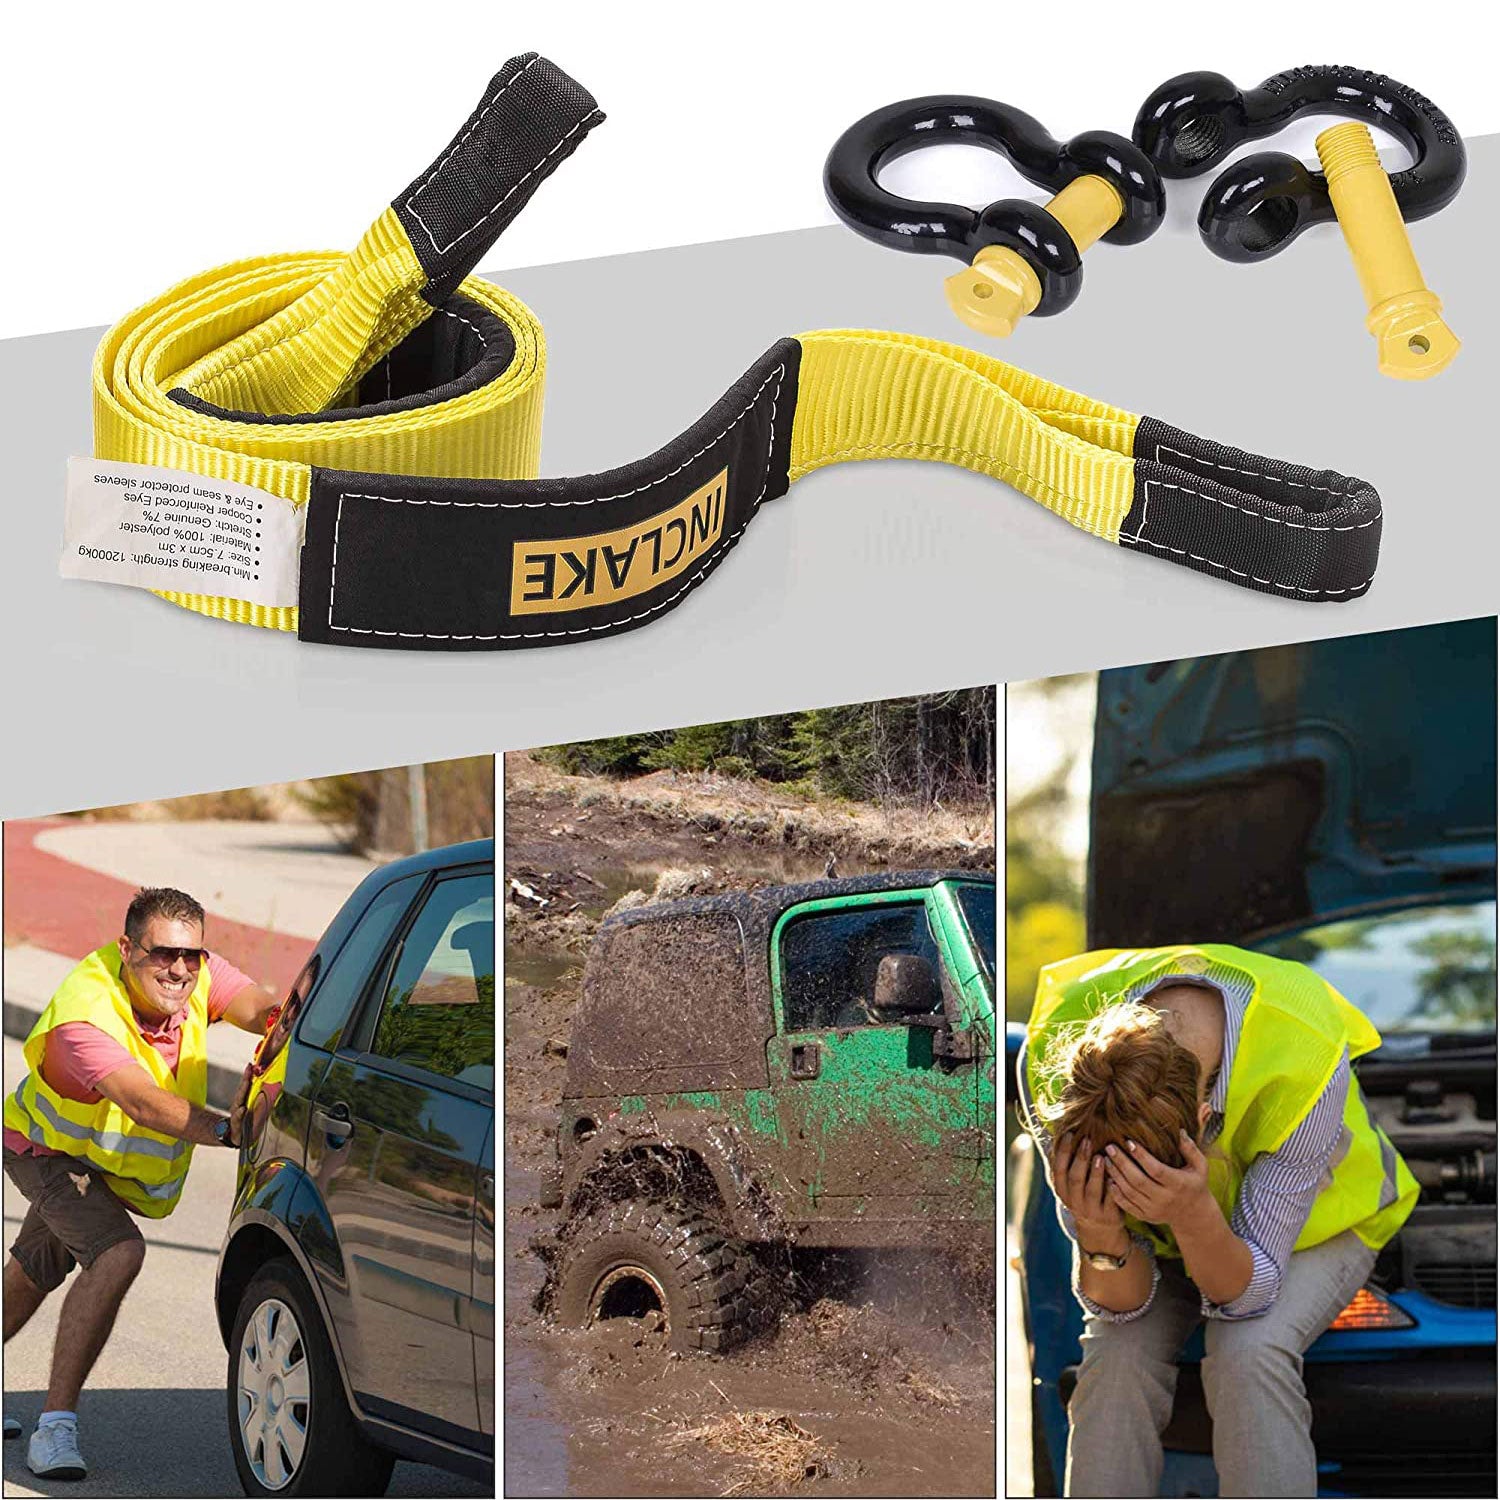 STANLEY ‎S1053 Black/Yellow 2 x 30' Tow Strap with Tri-Hook (9,000 lb  Break Strength) for Disabled Recreational Vehicles